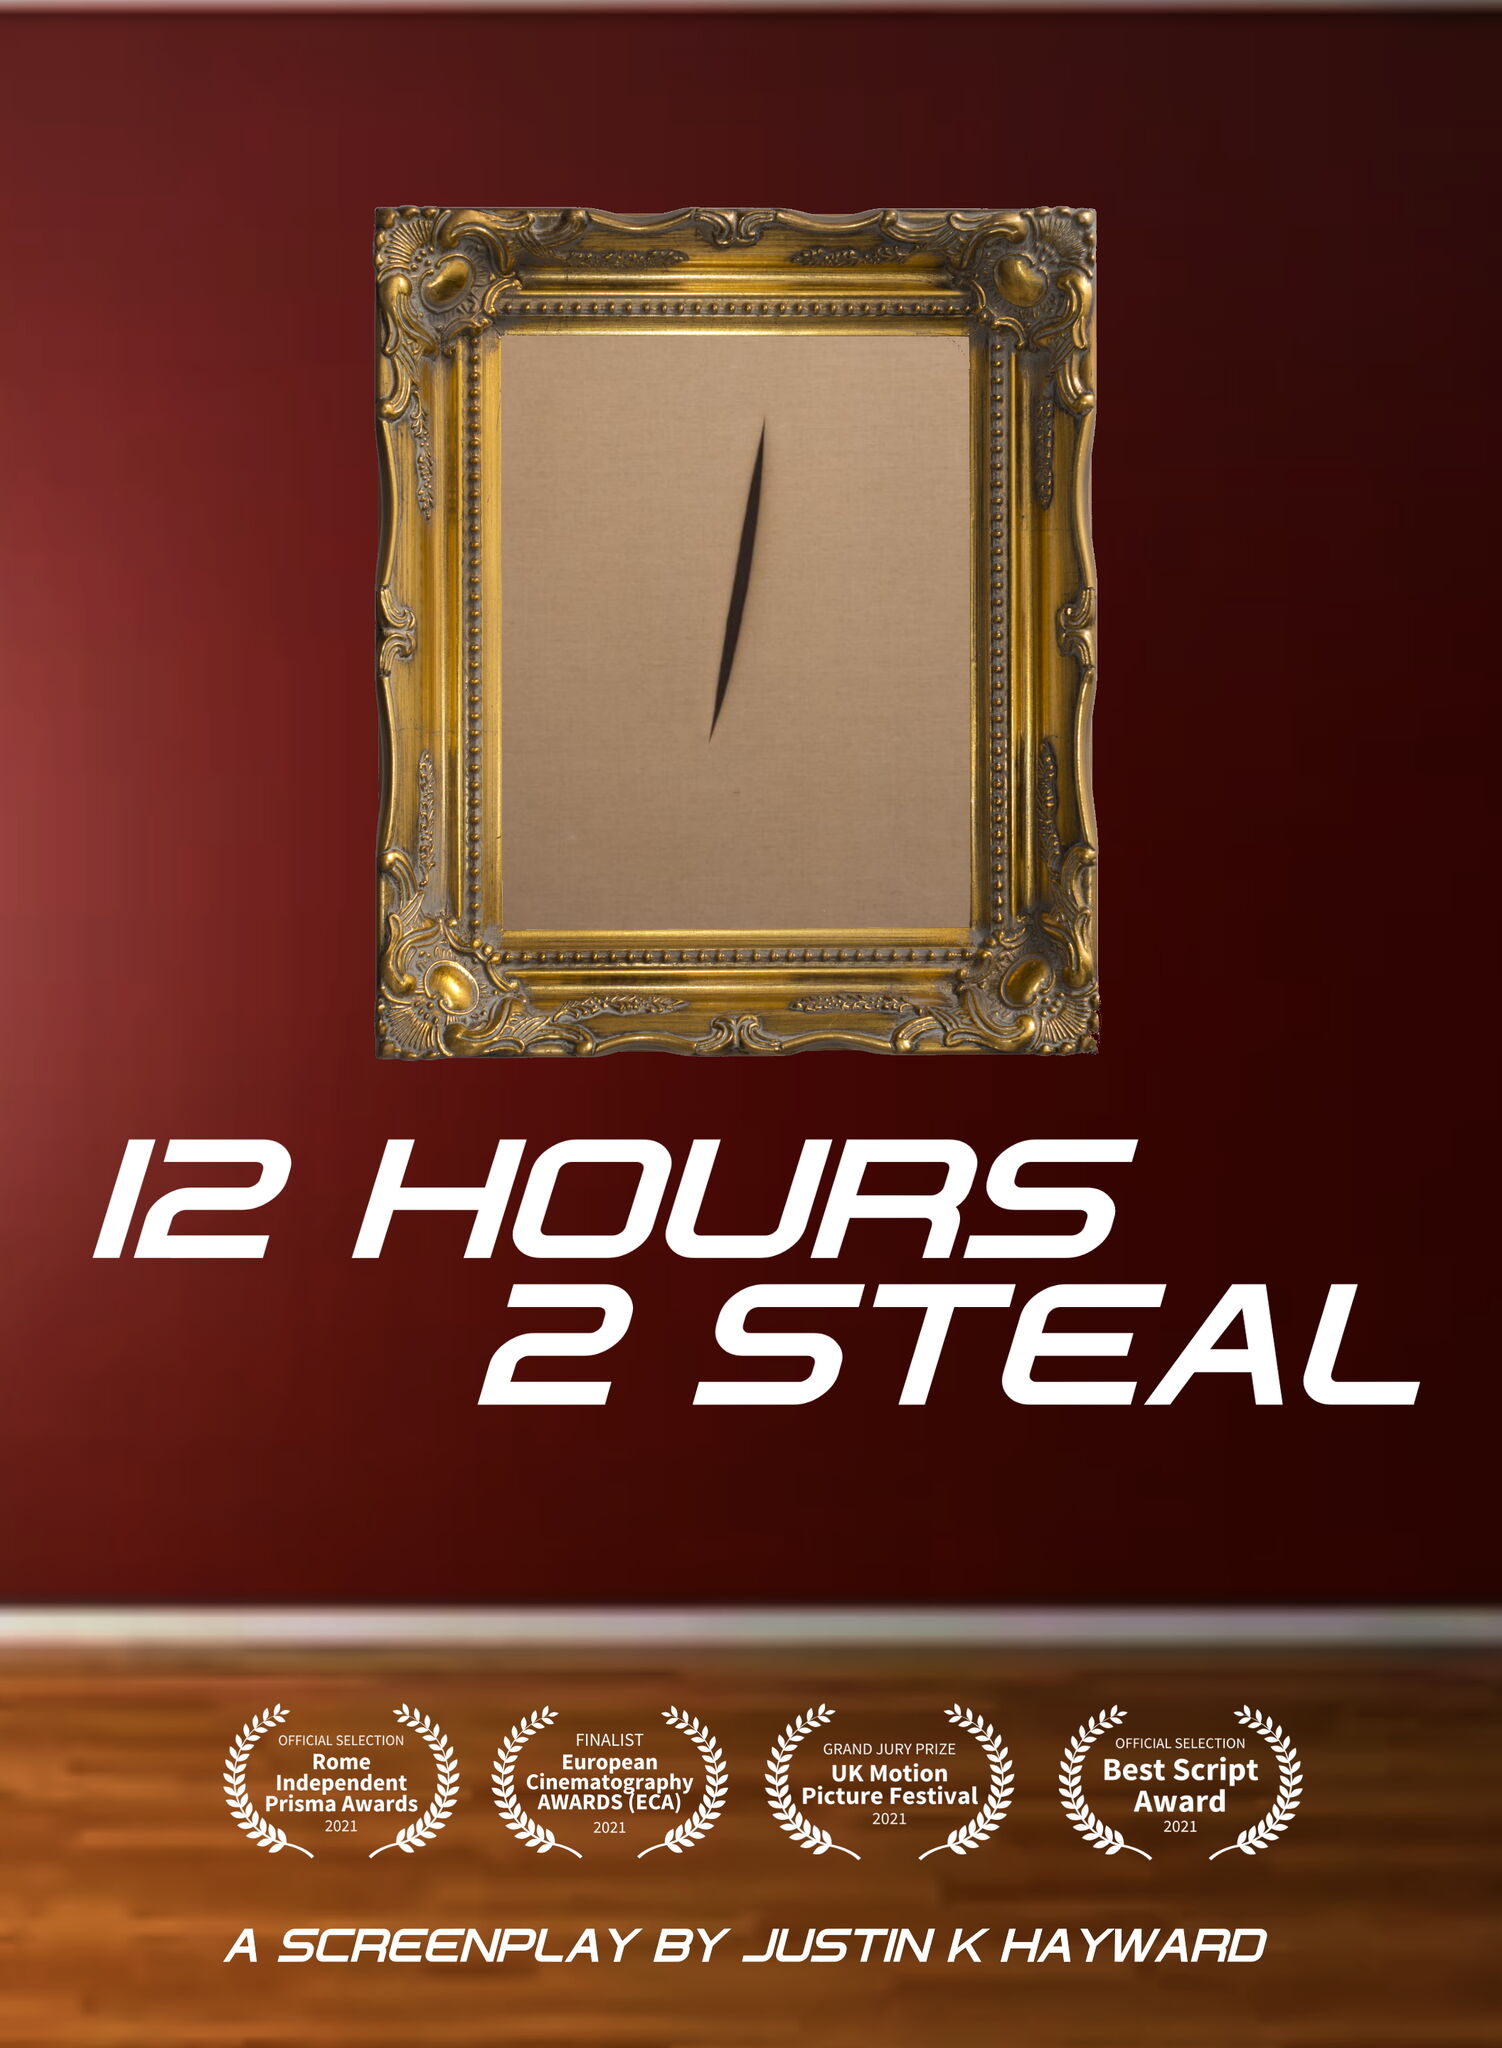 12 HOURS 2 STEAL